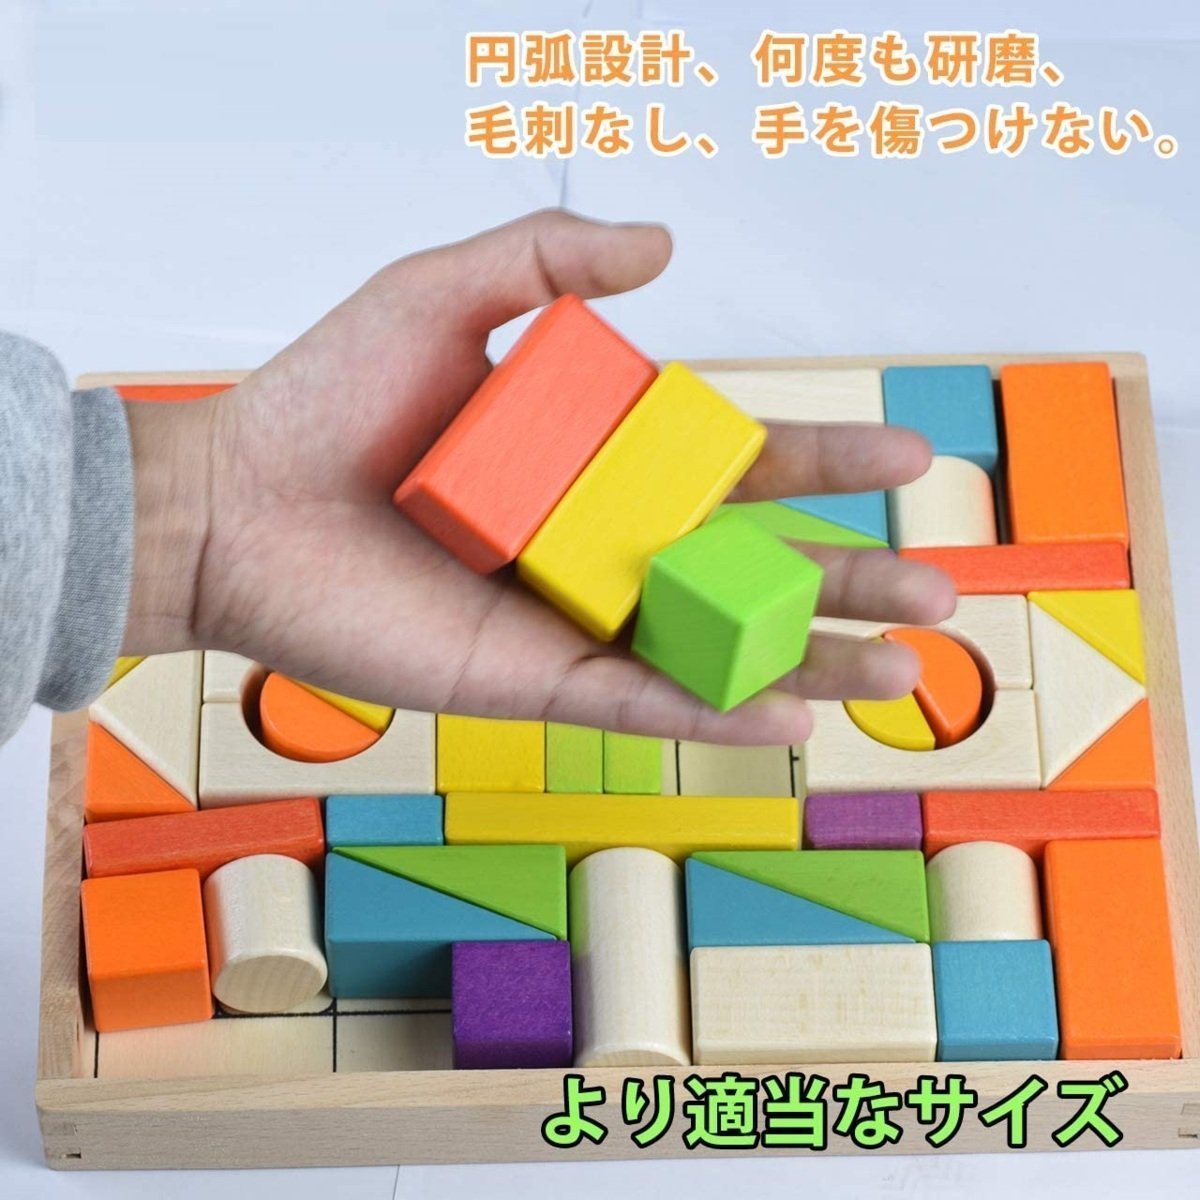 CJM425* loading tree wooden block monte so-li wooden toy natural colorful construction solid puzzle building structure intellectual training toy color awareness 56 PCS